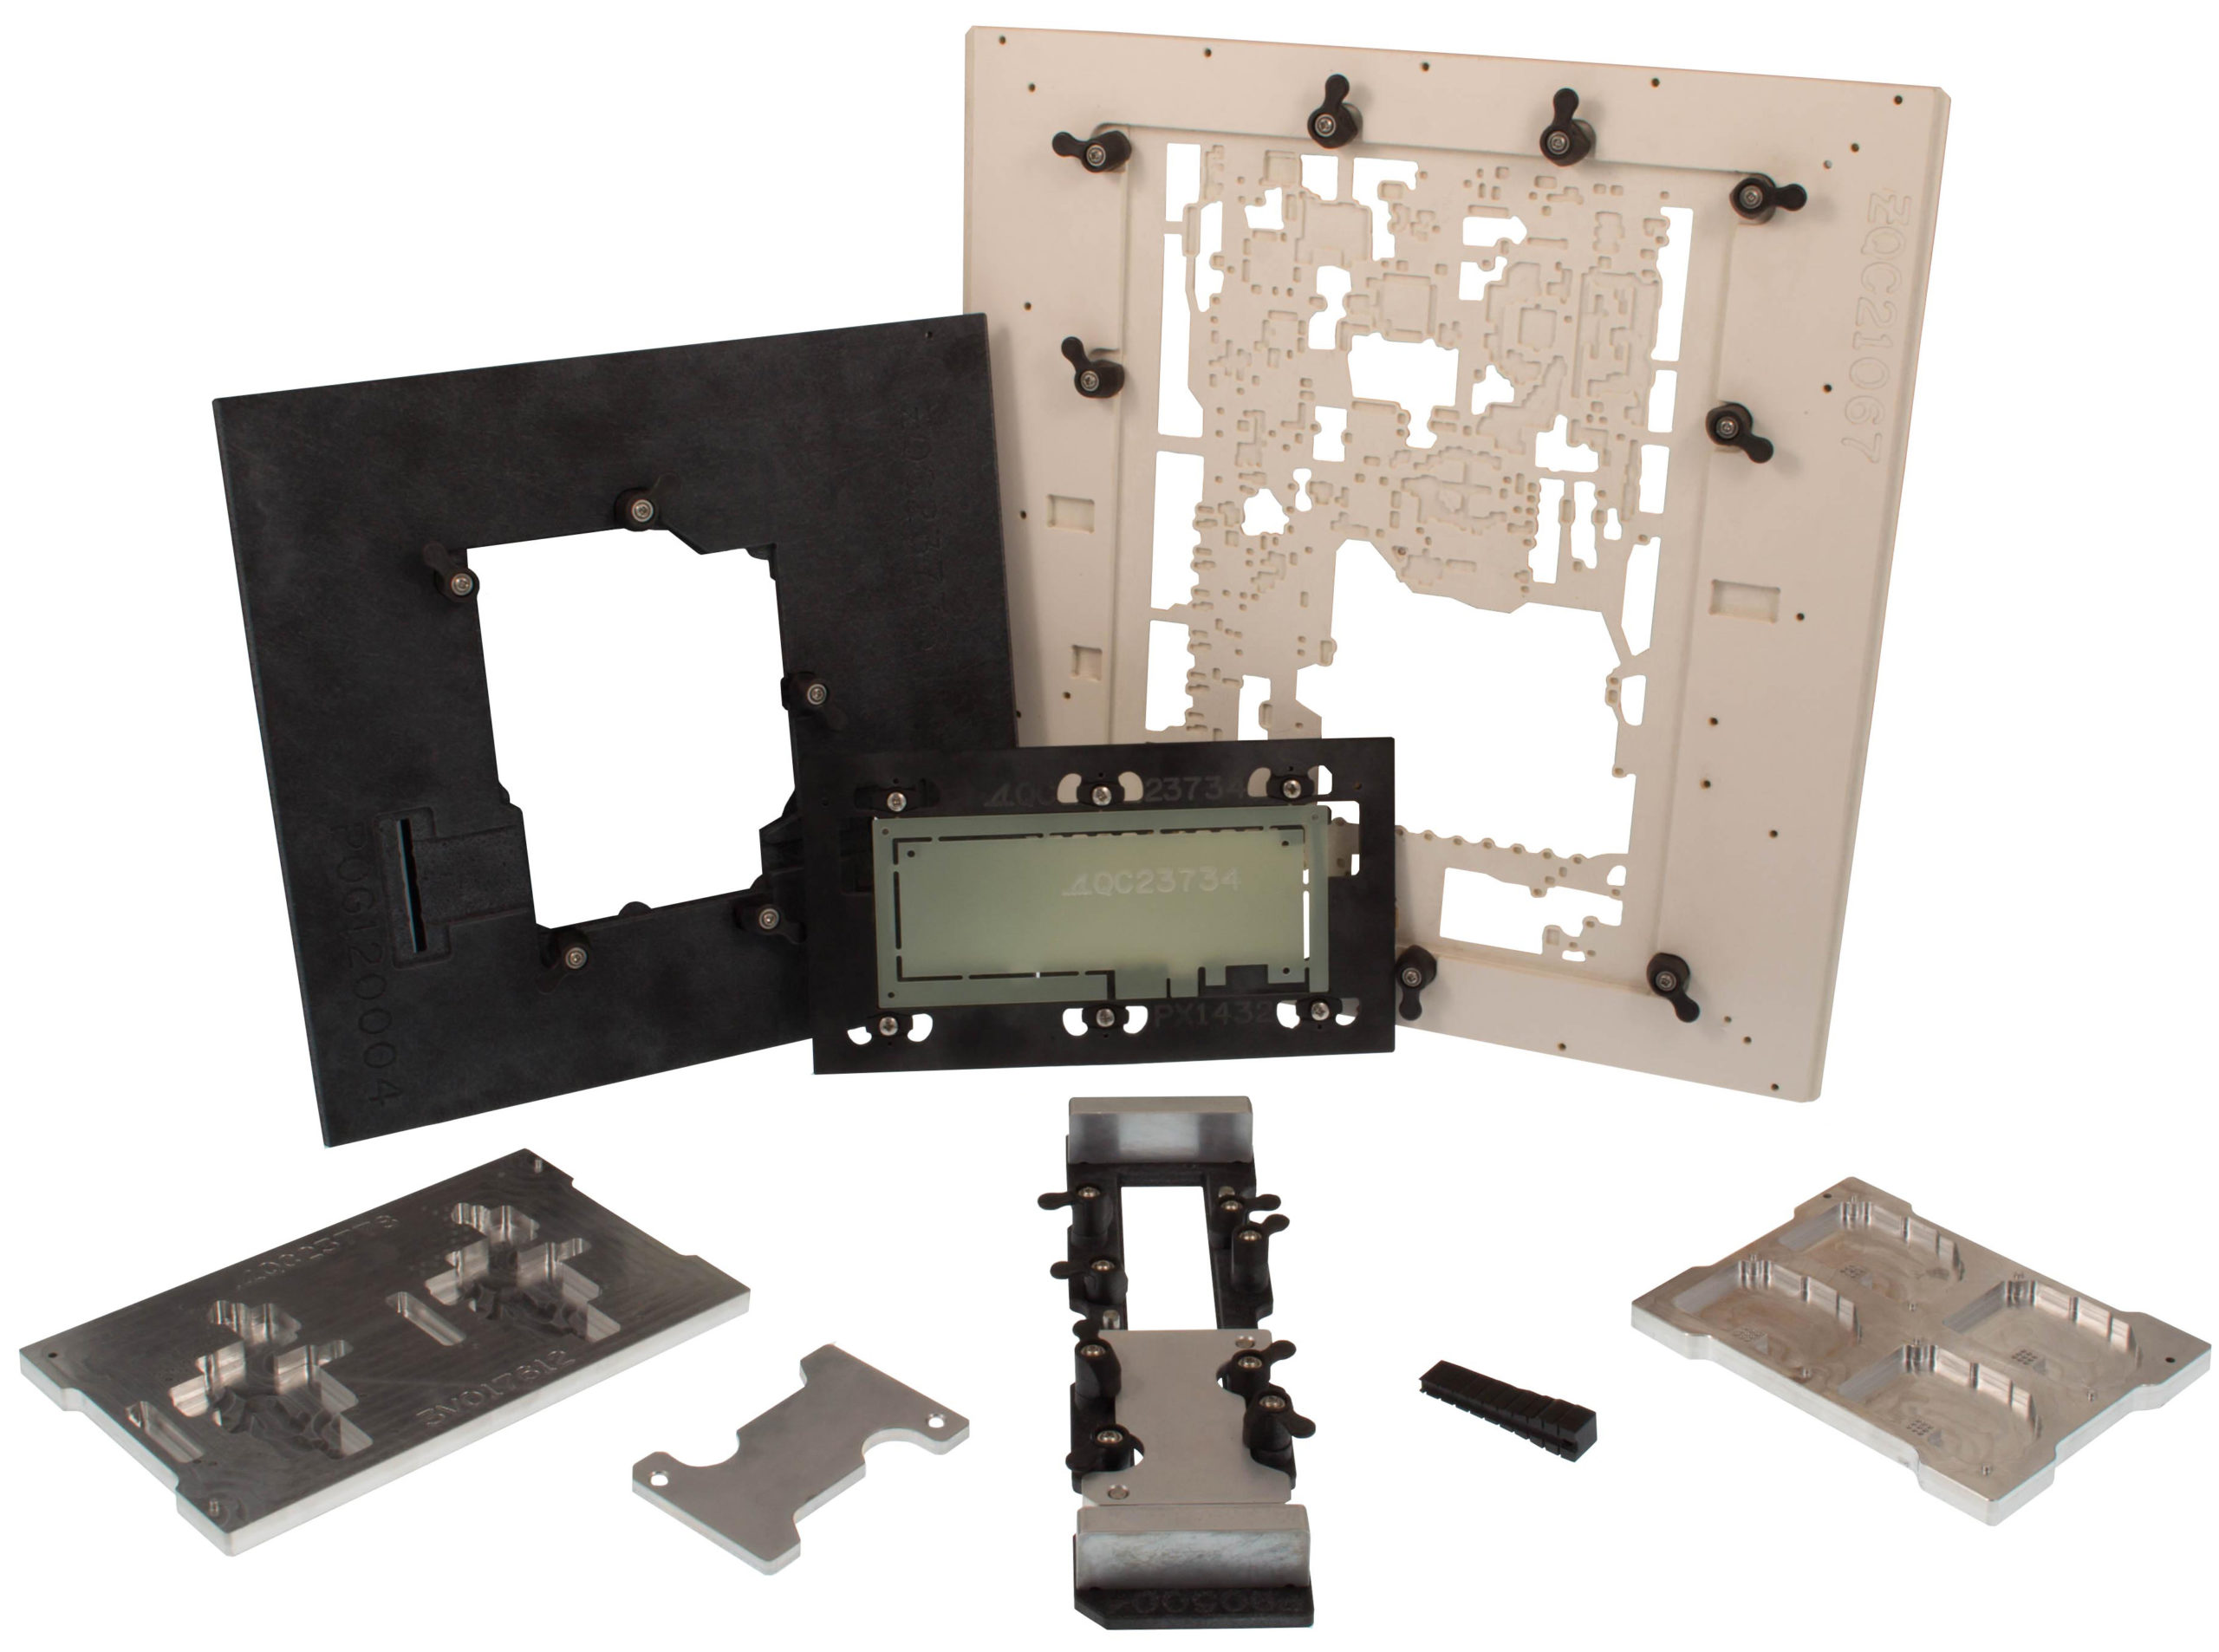 PCB Production Tooling by Global Datum & Solder Connection.